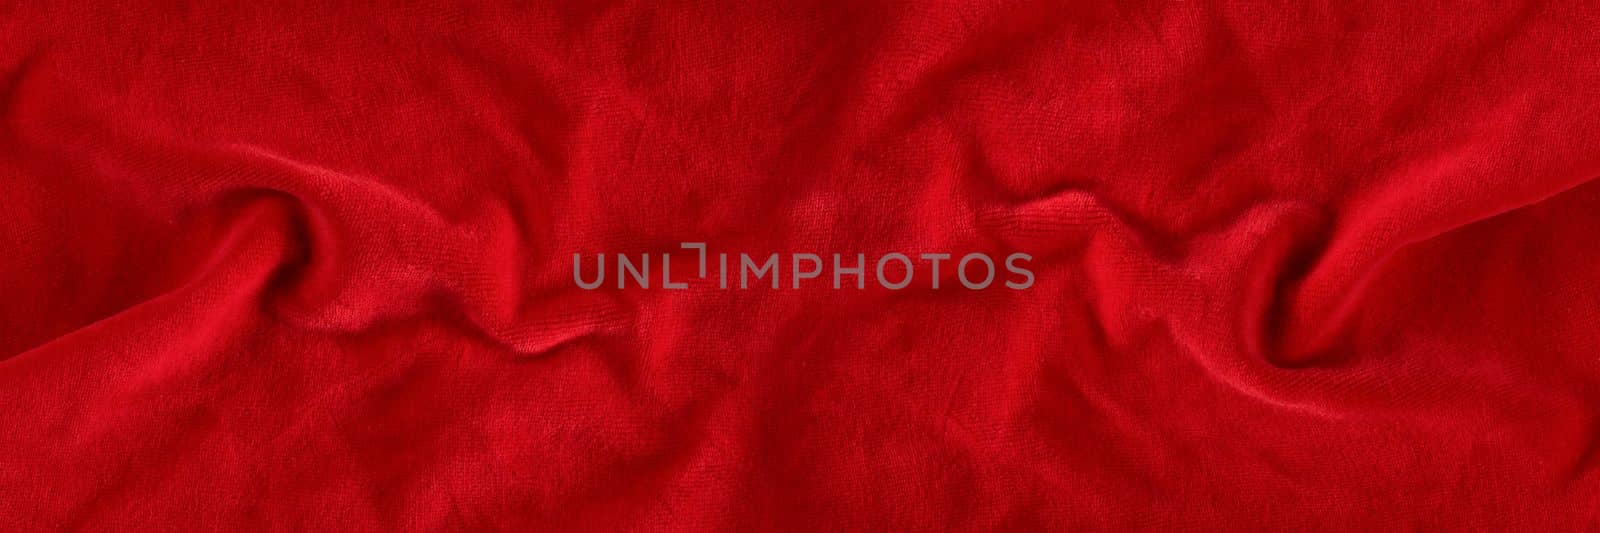 Red velvet texture for postcard or background for design. Red background for Christmas theme or Valentine's day, high quality, large format. Abstract texture of draped red velvet by SERSOL